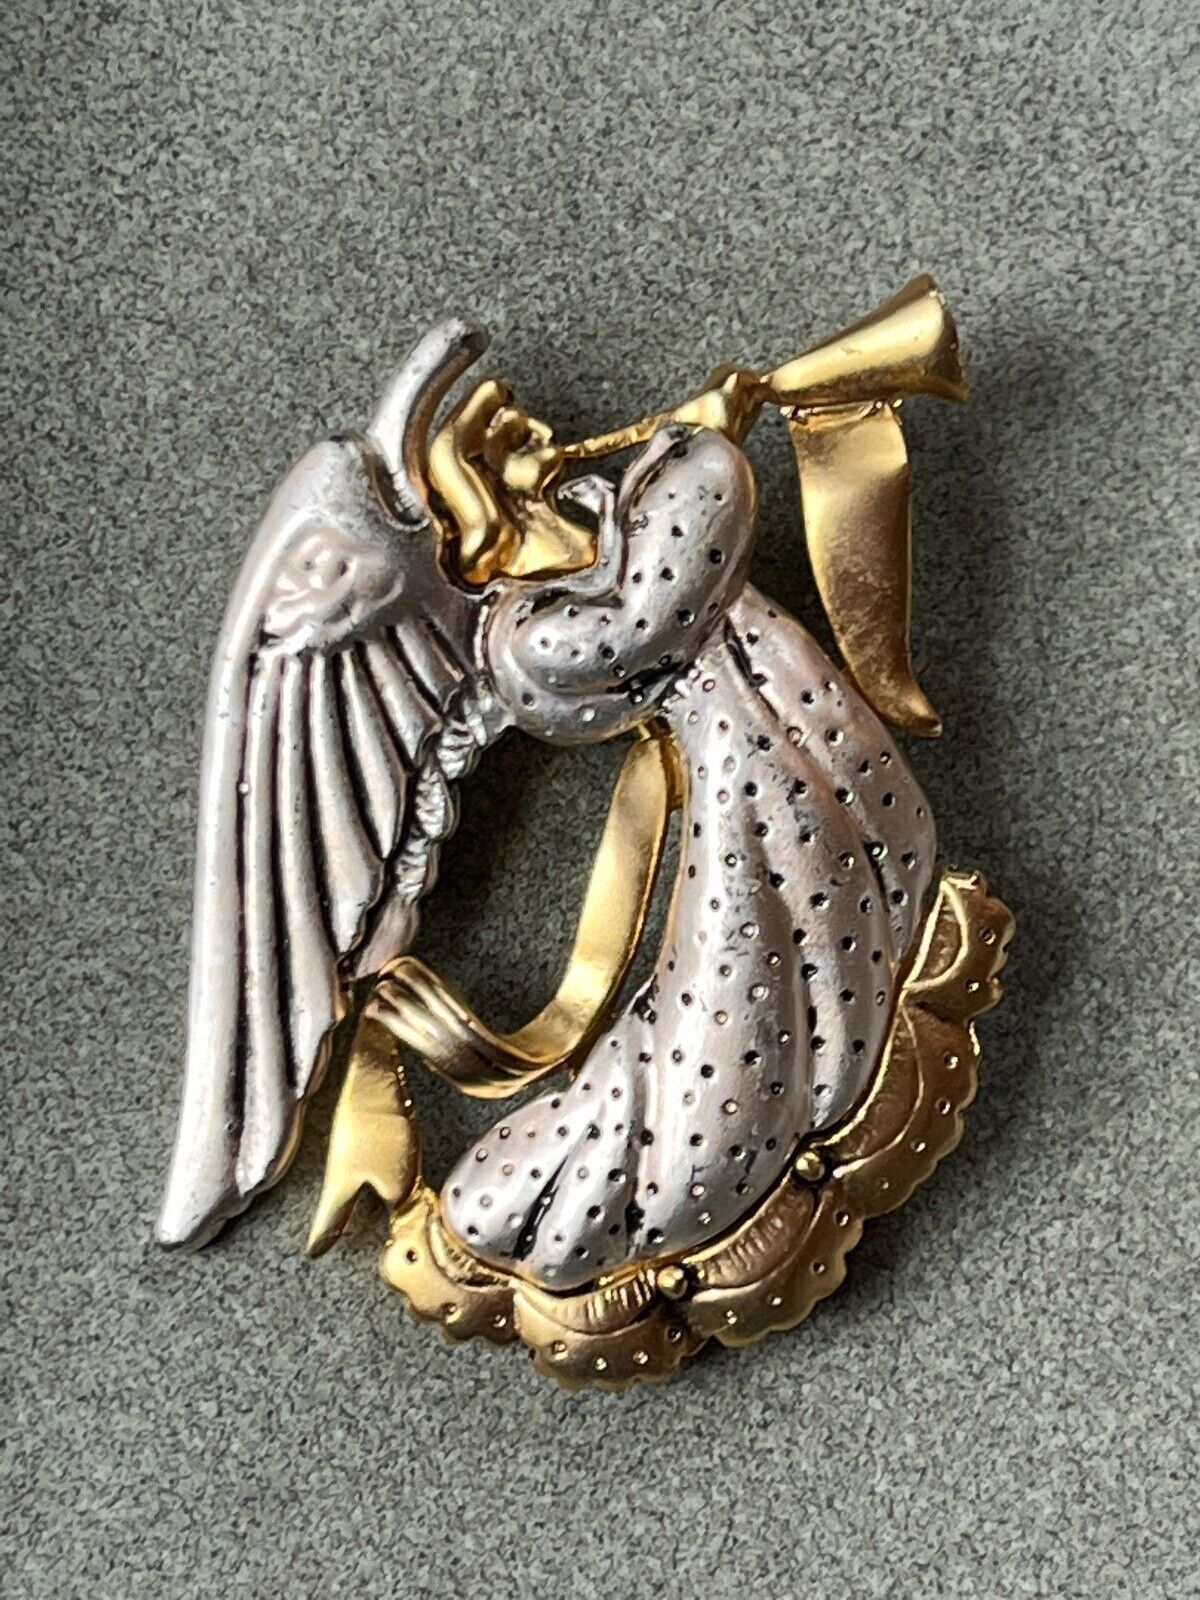 Danecraft Marked Brushed Gold & Silvertone Trumpet Playing ANGEL Pin Brooch – - $11.29